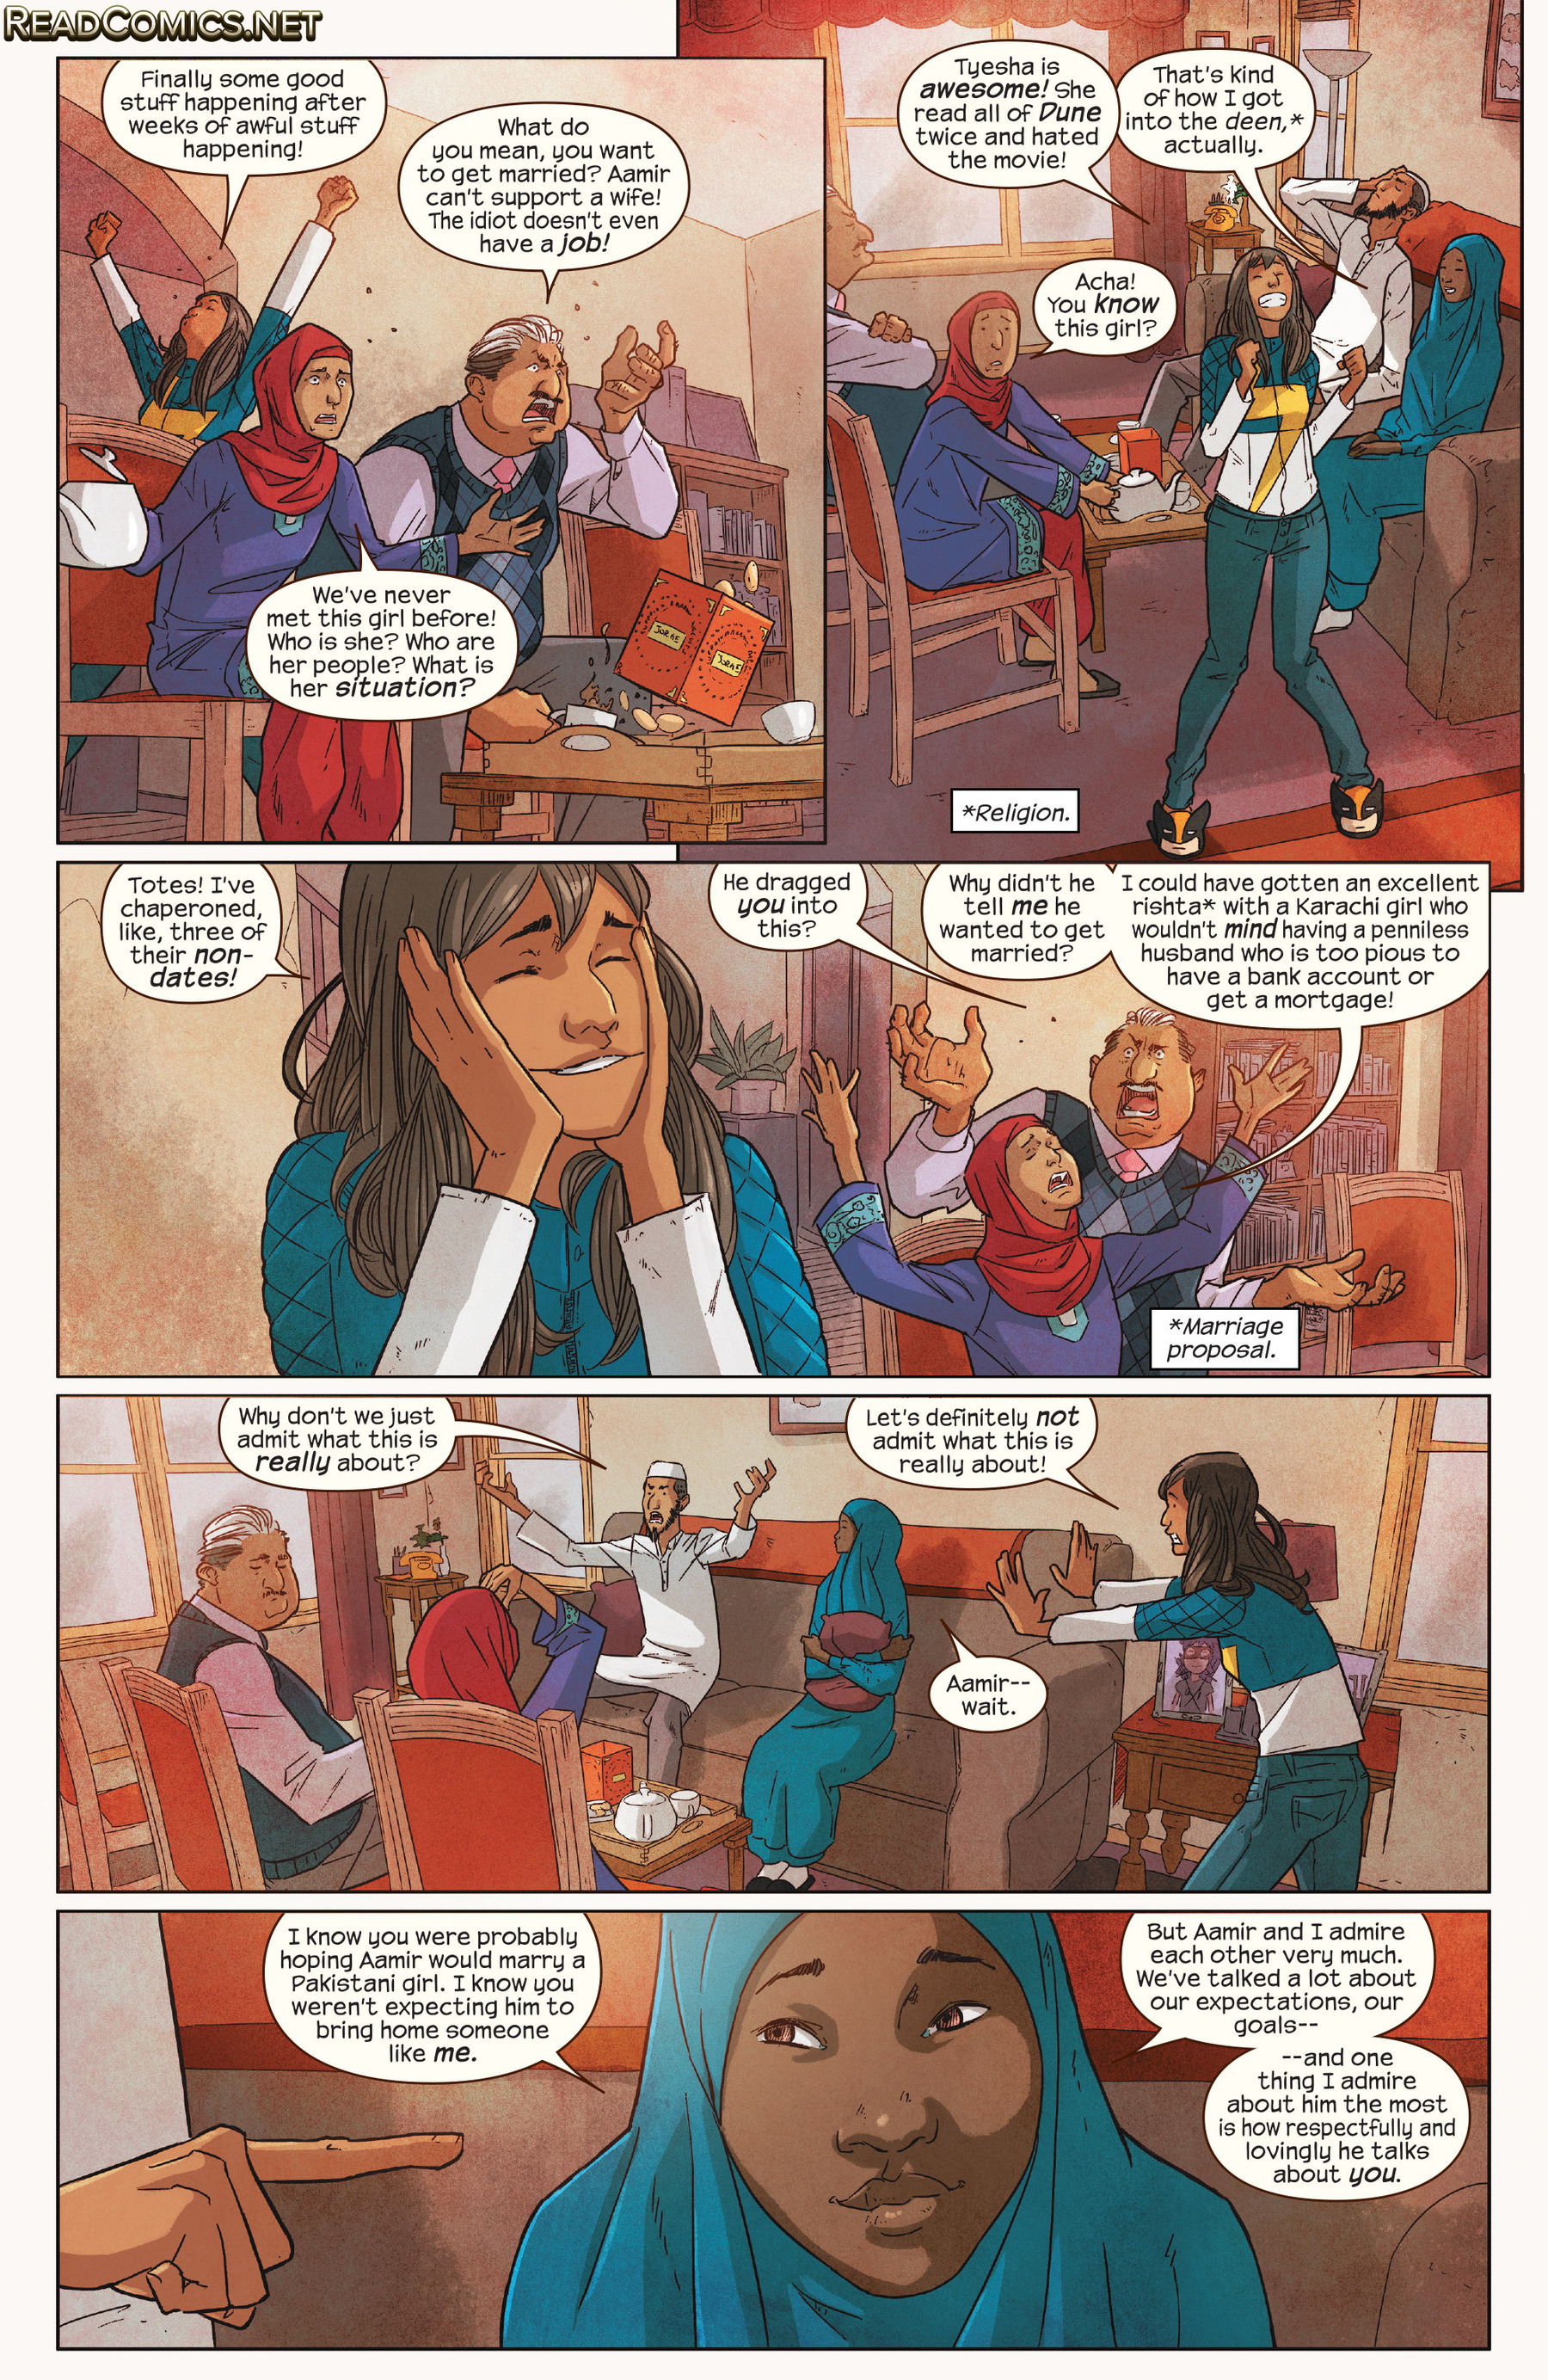 Ms. Marvel (2015-): Chapter 4 - Page 3